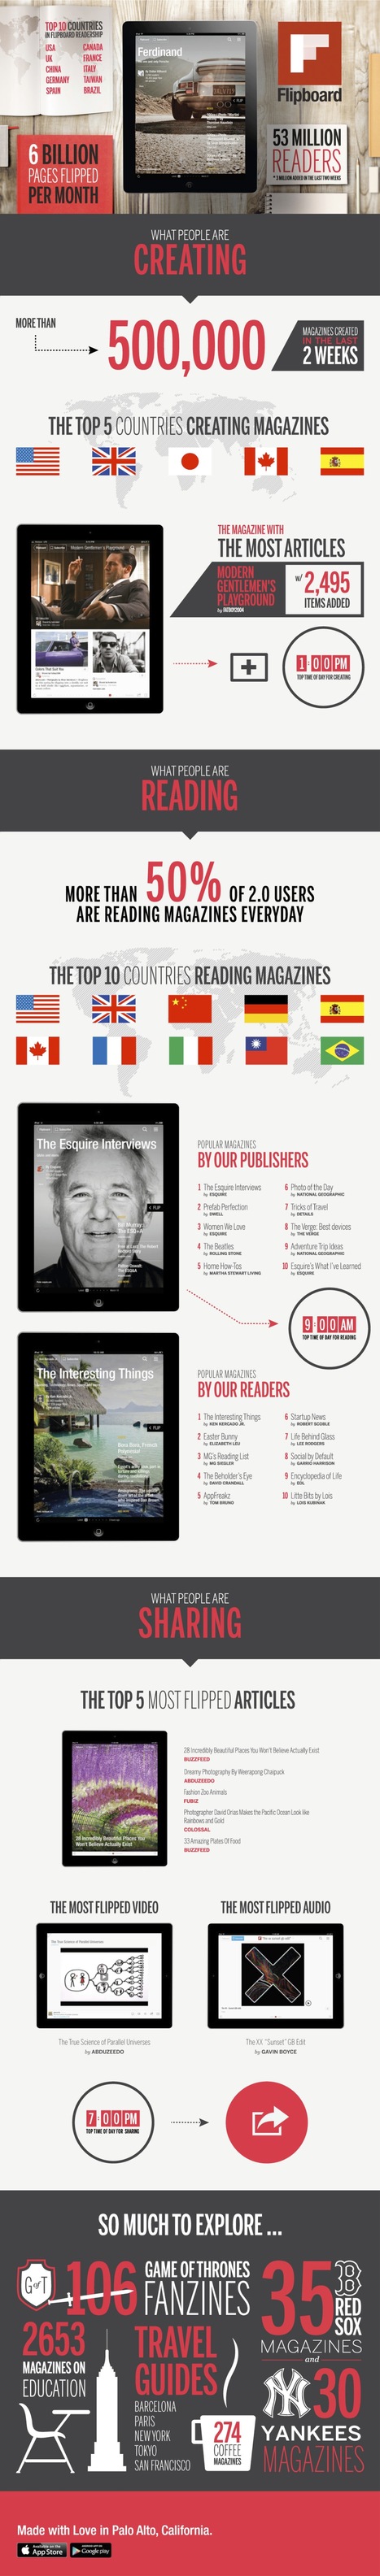 500,000 Flipboard magazines created in 2 weeks (Infographic) | Latest Social Media News | Scoop.it